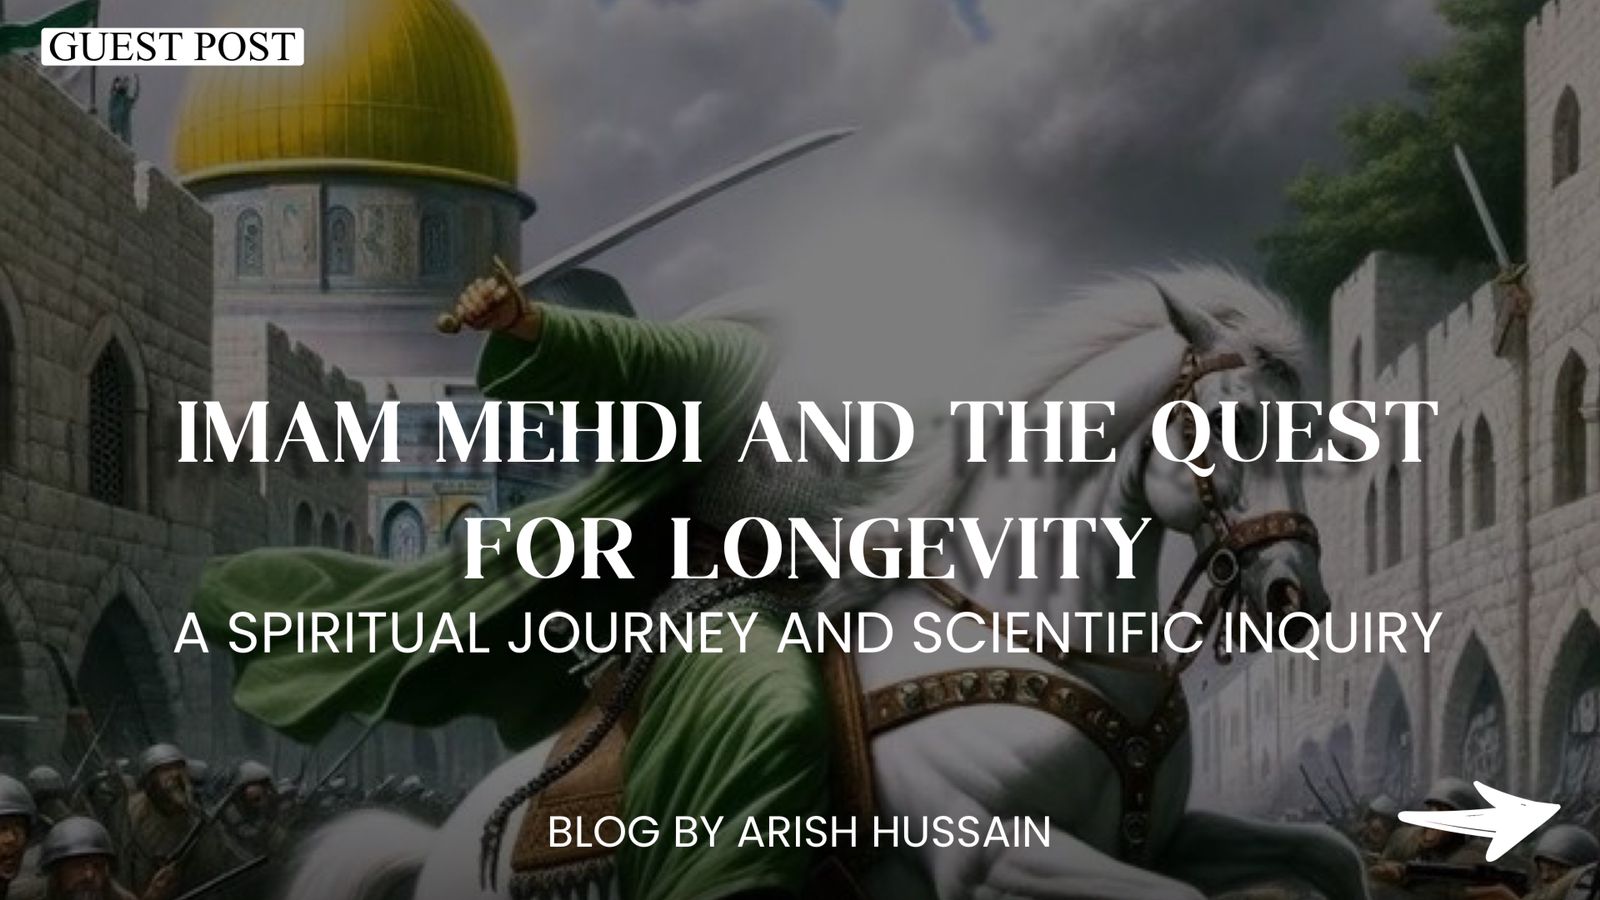 Imam Mahdi and the Quest for Longevity: A Spiritual Journey and Scientific Inquiry